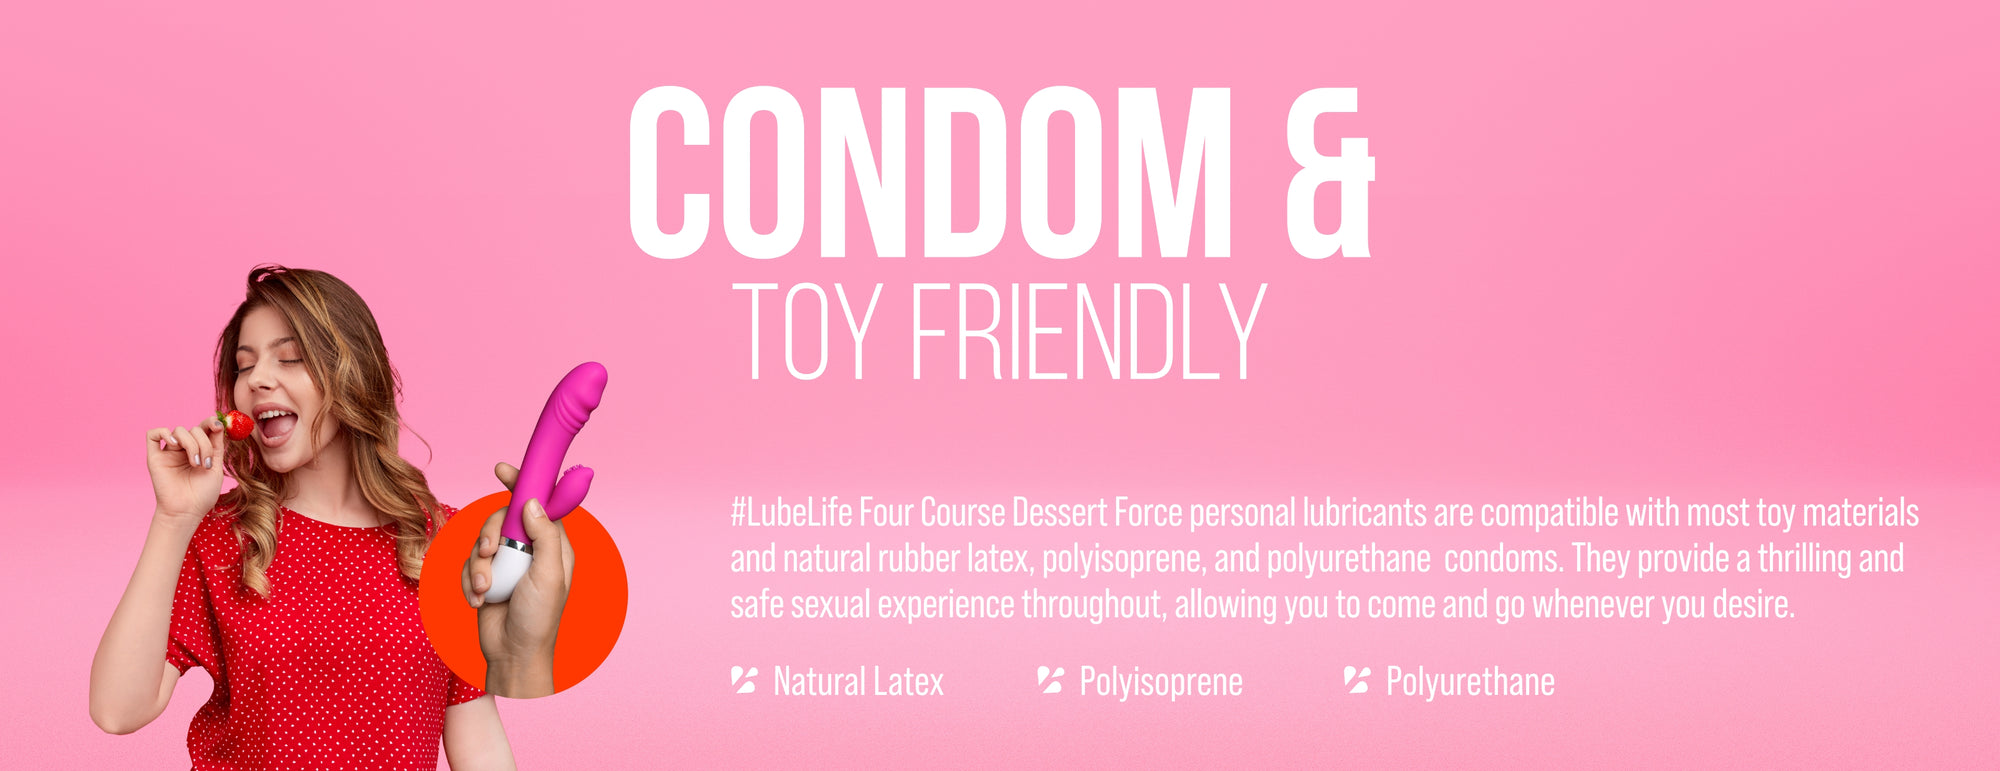 LubeLife water-based anal lubricant is compatible with most toy materials and natural rubber latex and polyisoprene but not compatible with polyurethane condoms. 